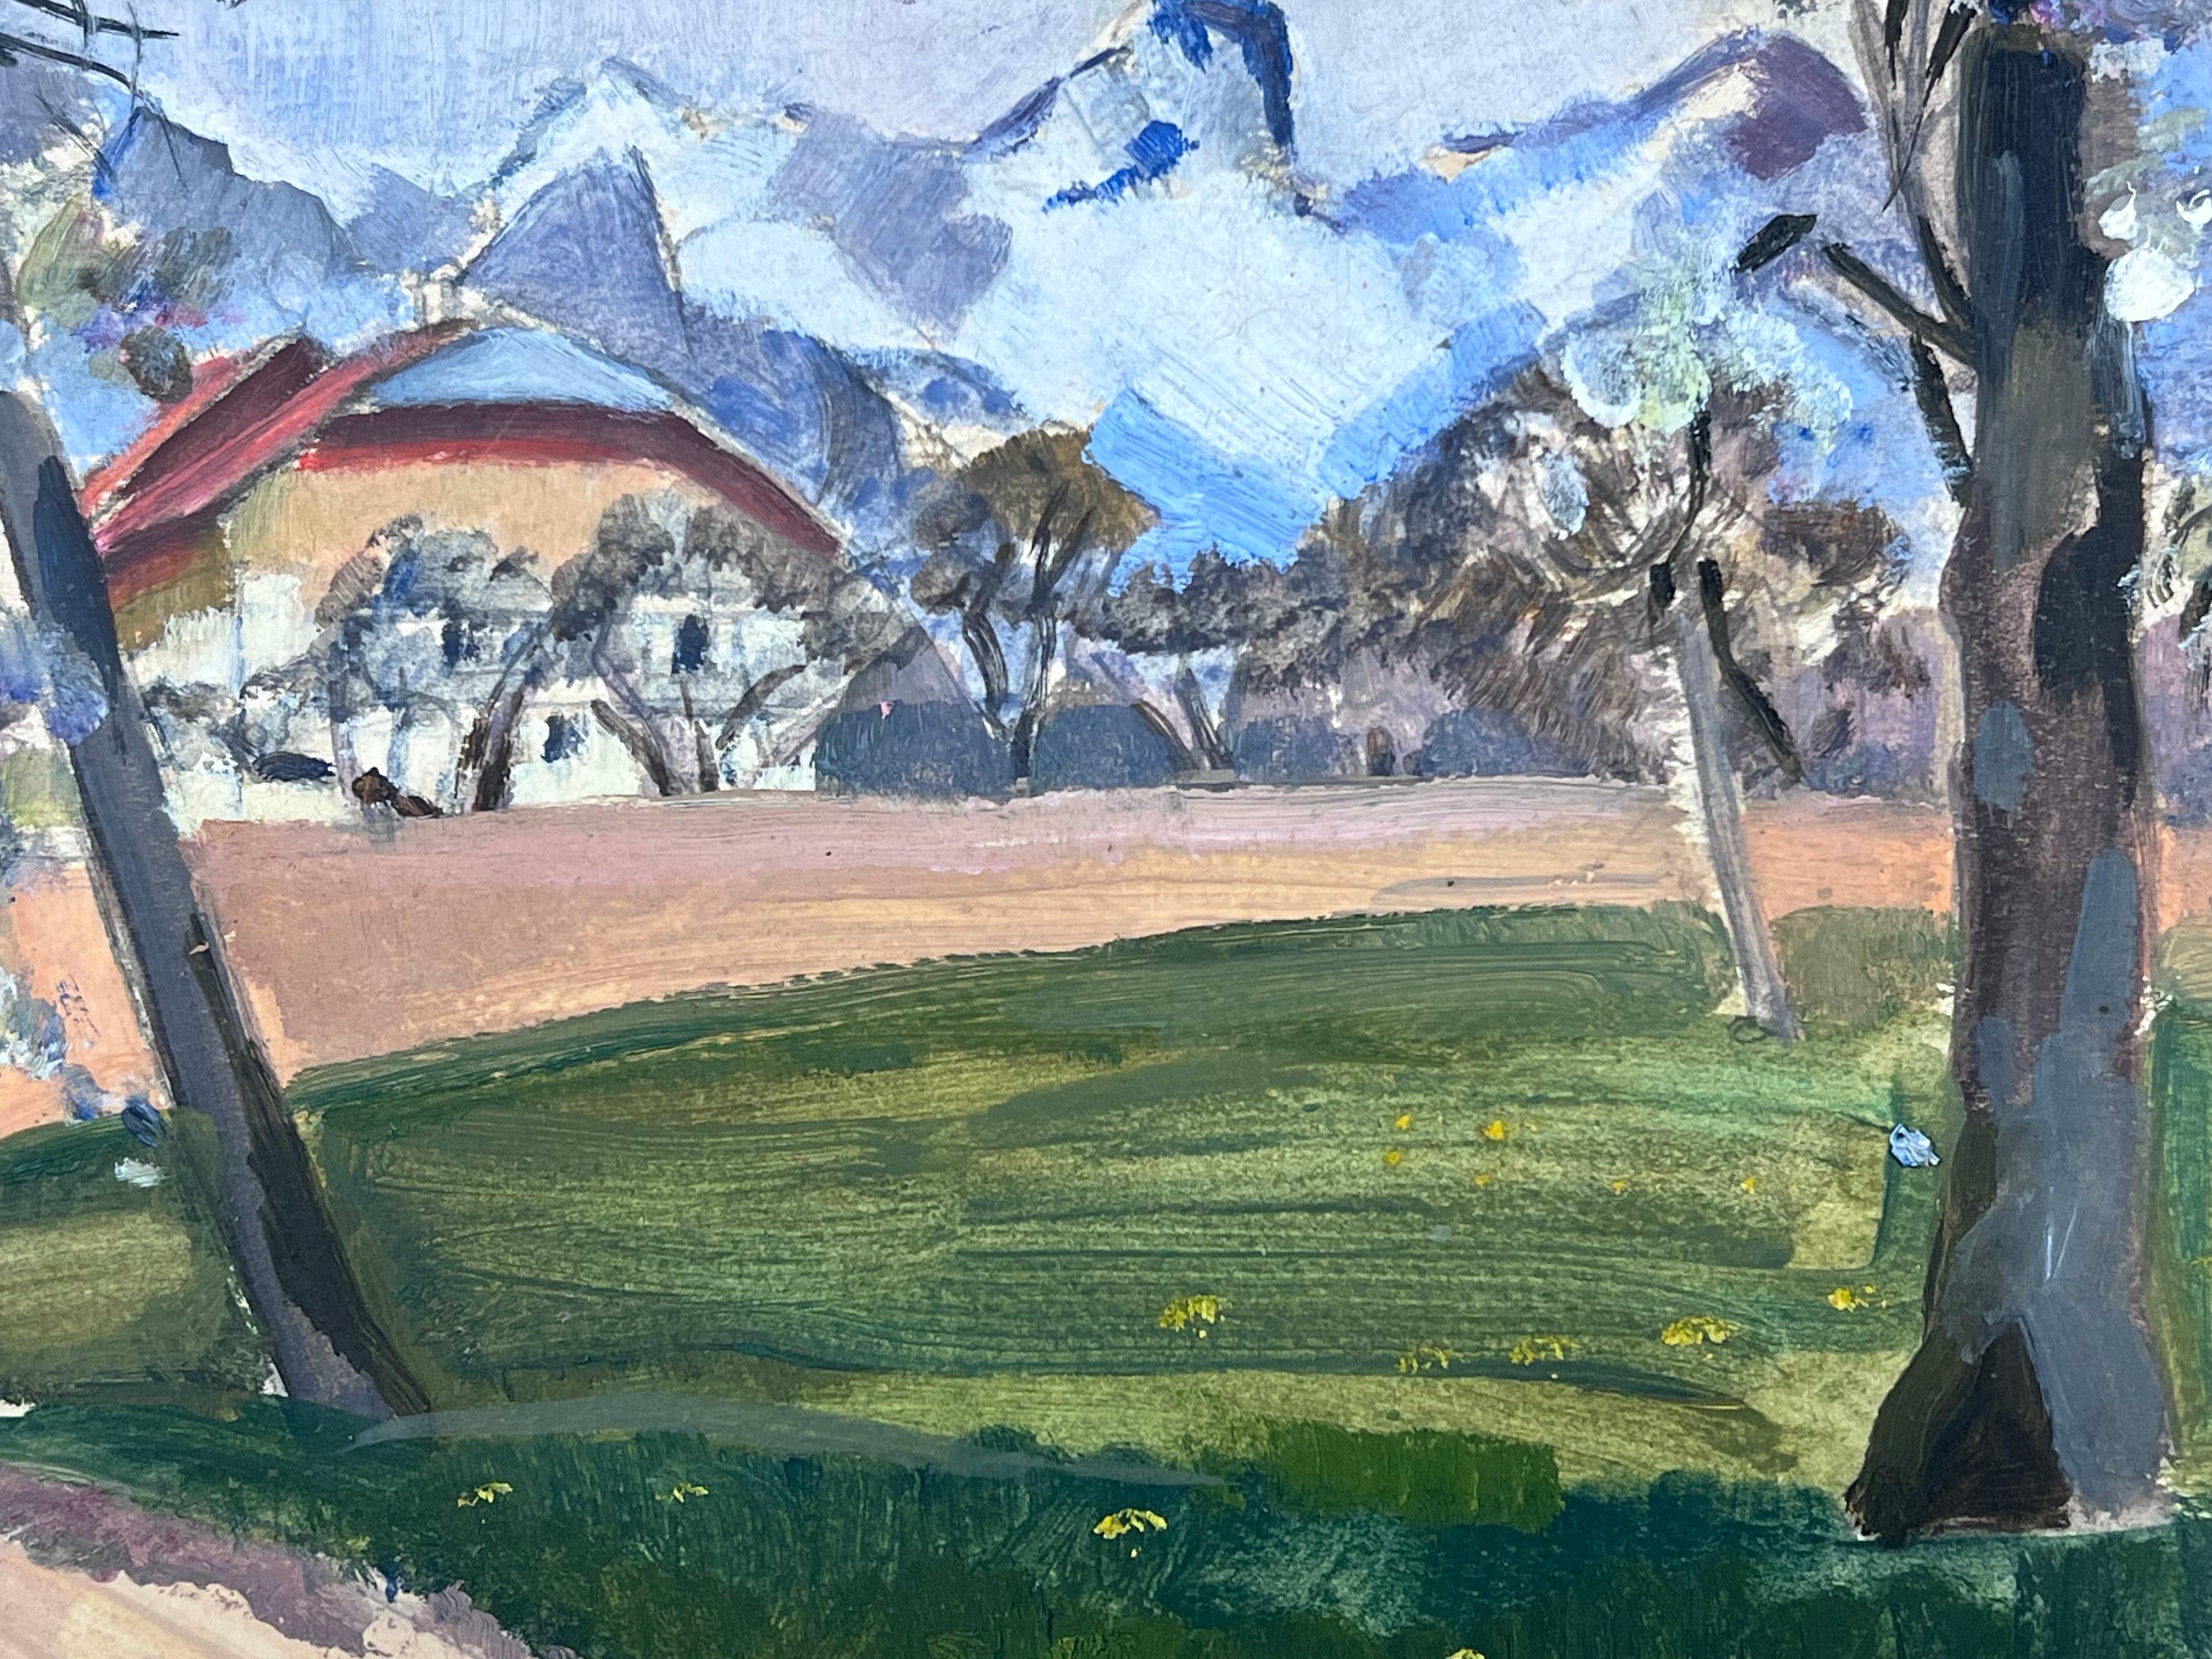 French Landscape
French 1950's Impressionist 
artist gouache on artist paper, unframed
painting: 7 x 10 inches
inscribed verso
provenance: from a large private collection of this artists work in Northern France
condition: original, good and sound